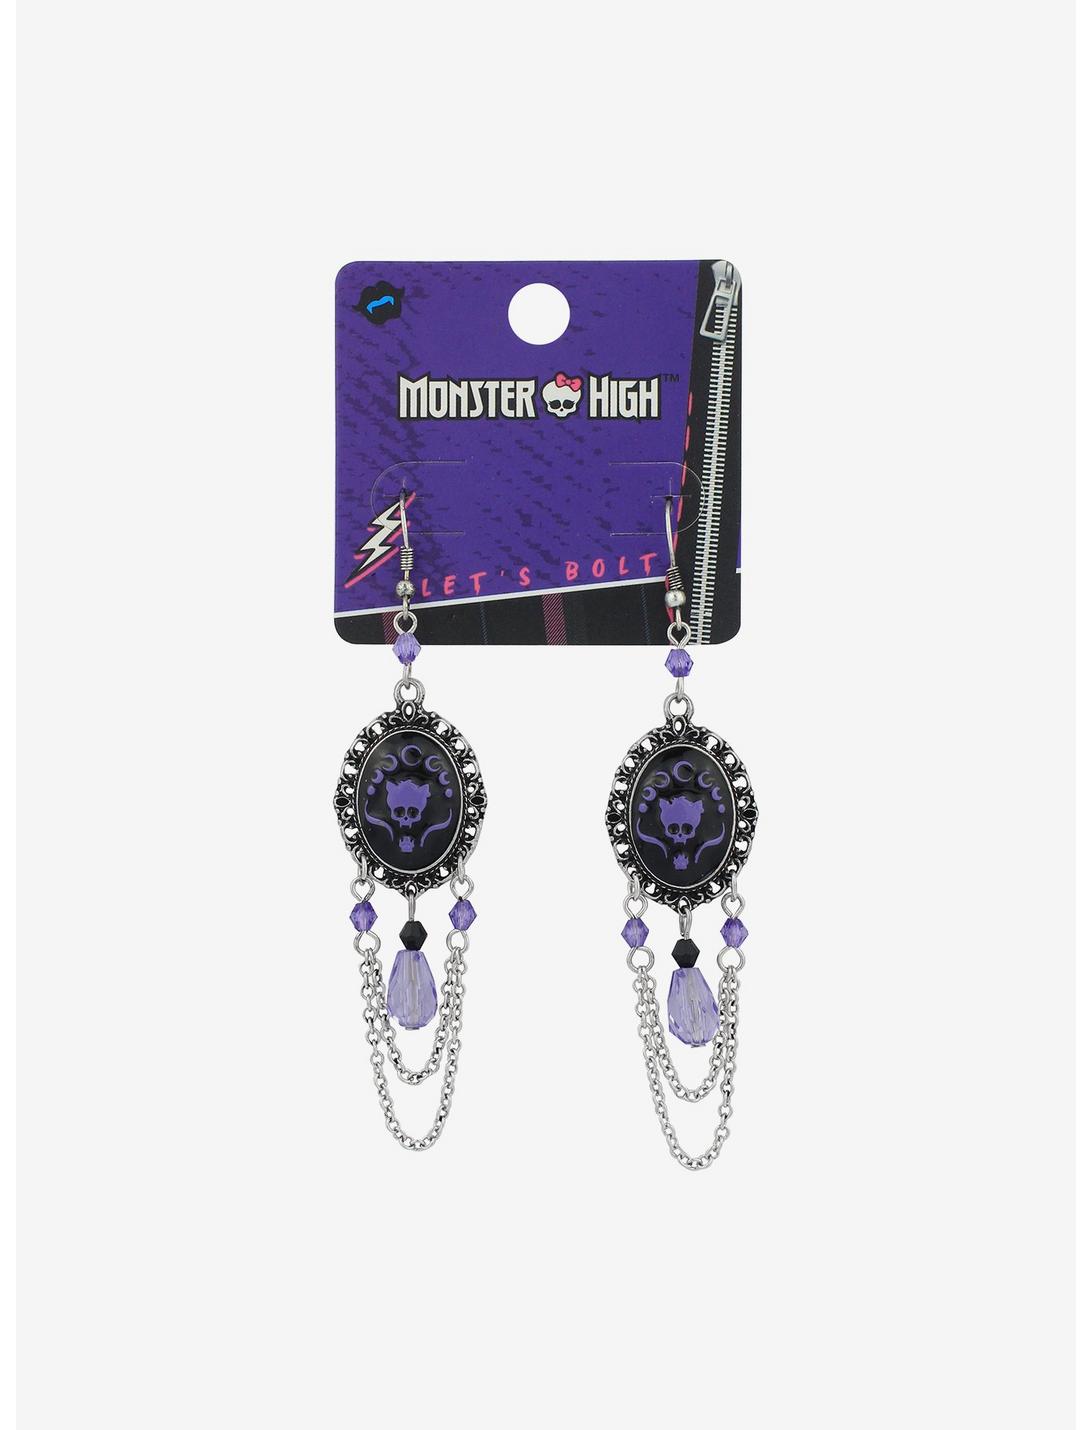 Monster High Clawdine Cameo Earrings, , hi-res